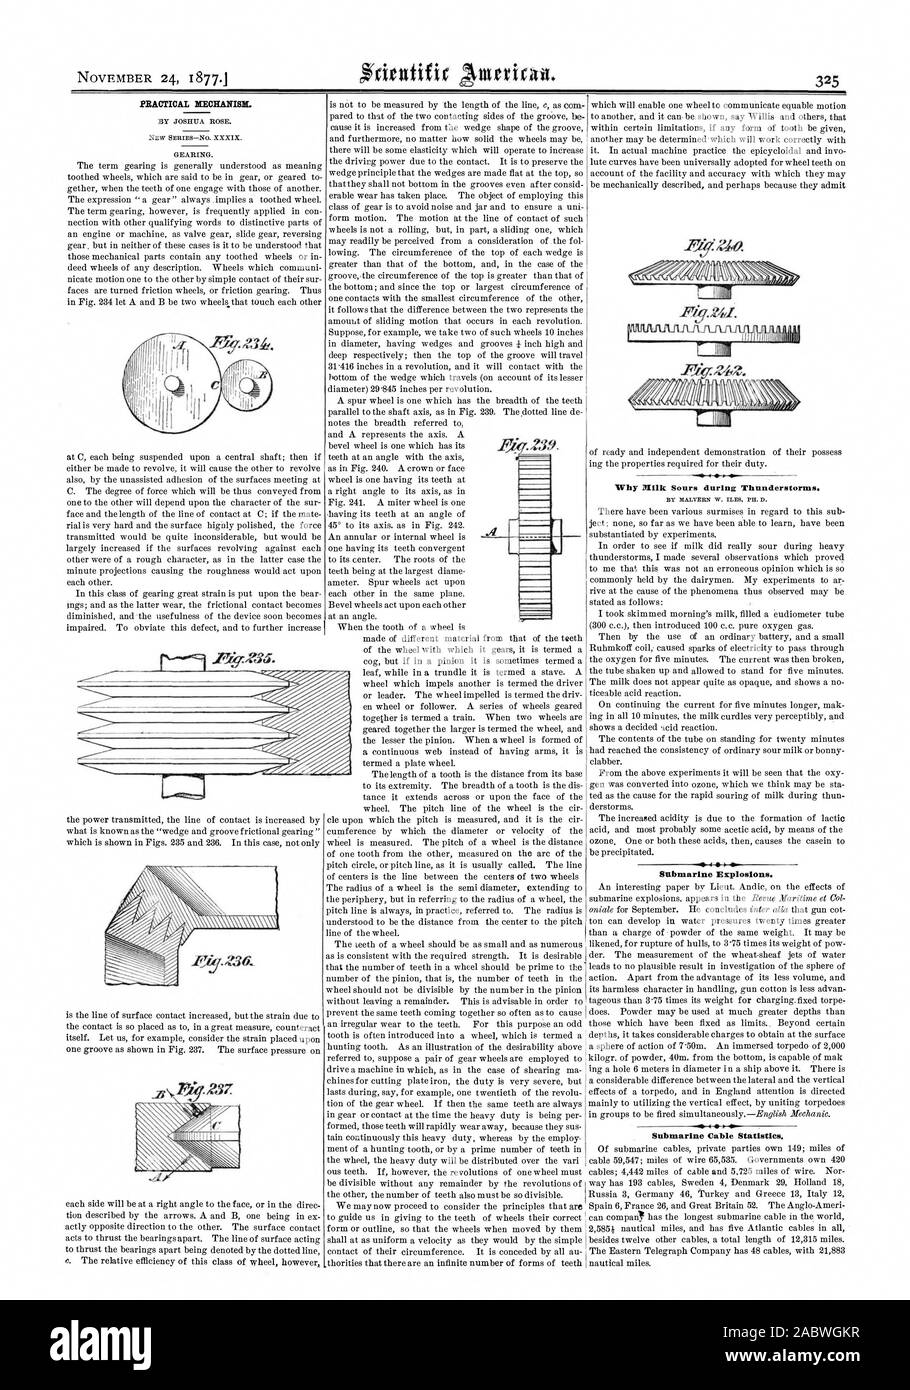 Sours during Thunderstorms. Submarine Explosions. Submarine Cable Statistics., scientific american, 1877-11-24 Stock Photo